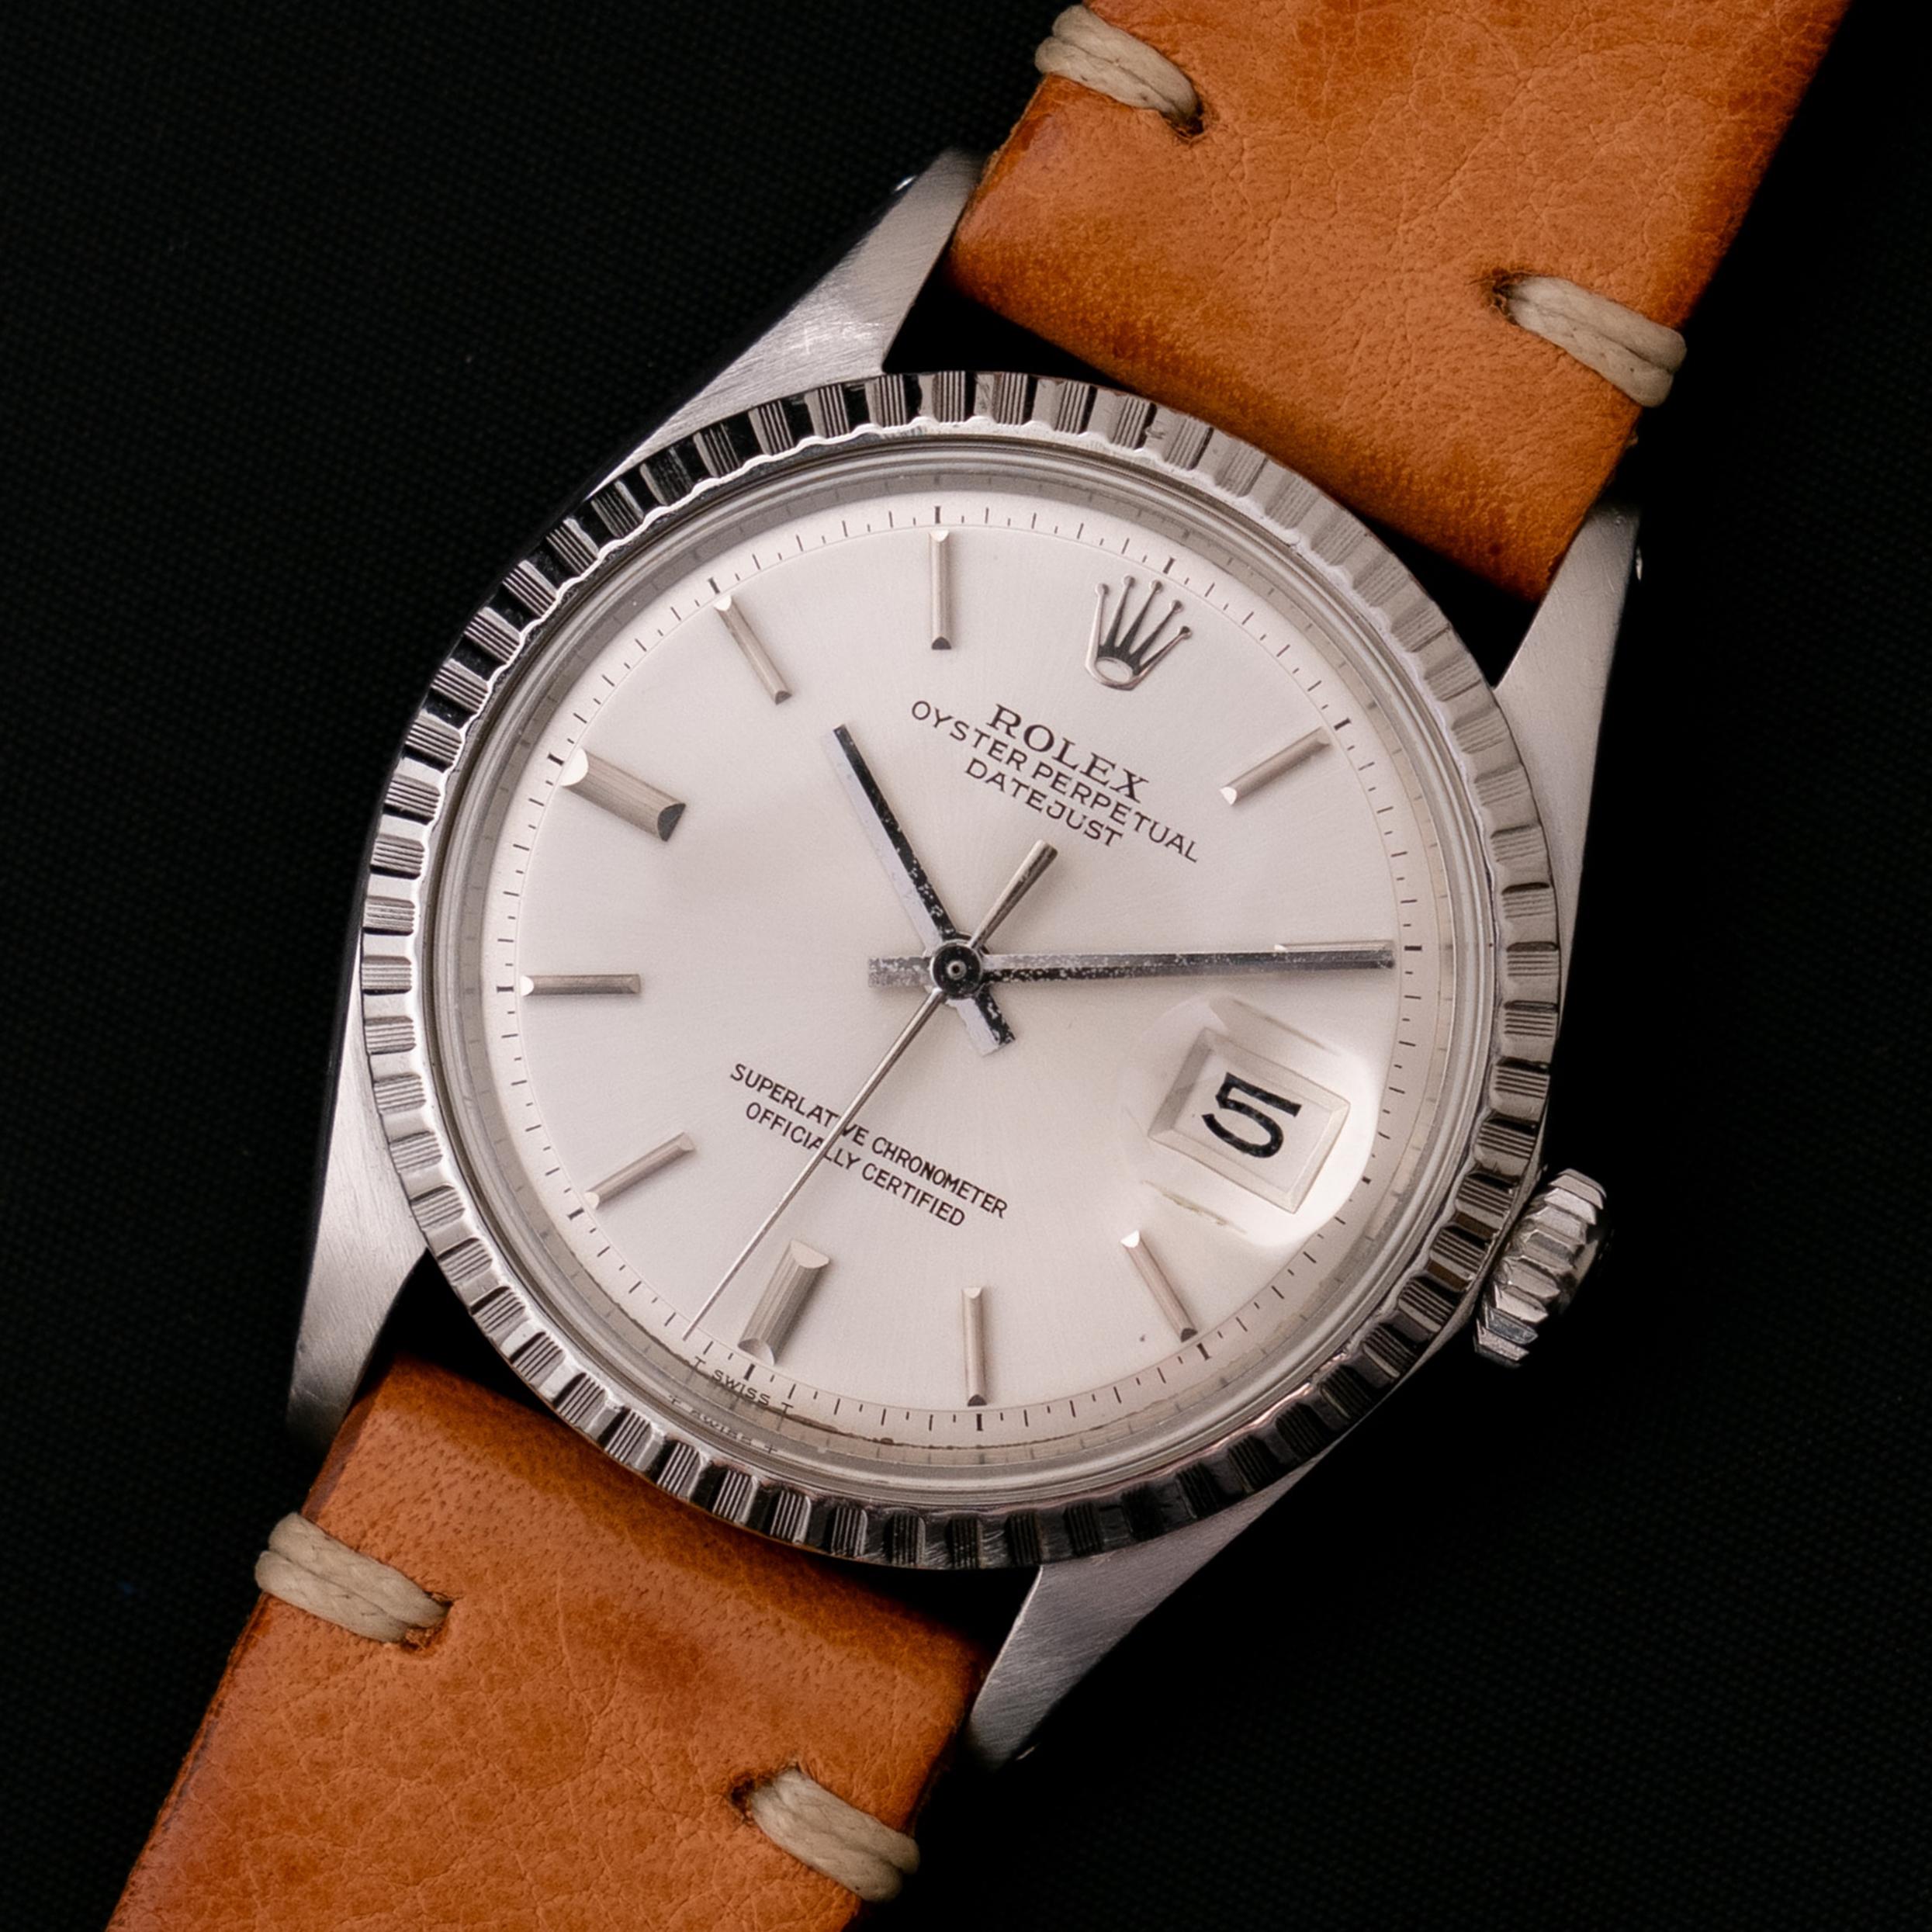 Brand: Vintage Rolex
Model: 1603
Year: 1970
Serial number: 25xxxxx
Reference: C03467

Case: 36mm without crown; Show sign of wear with slight polish from previous w/ inner case back stamped 1601 IV.70

Dial: Aged Clean Condition without luminous